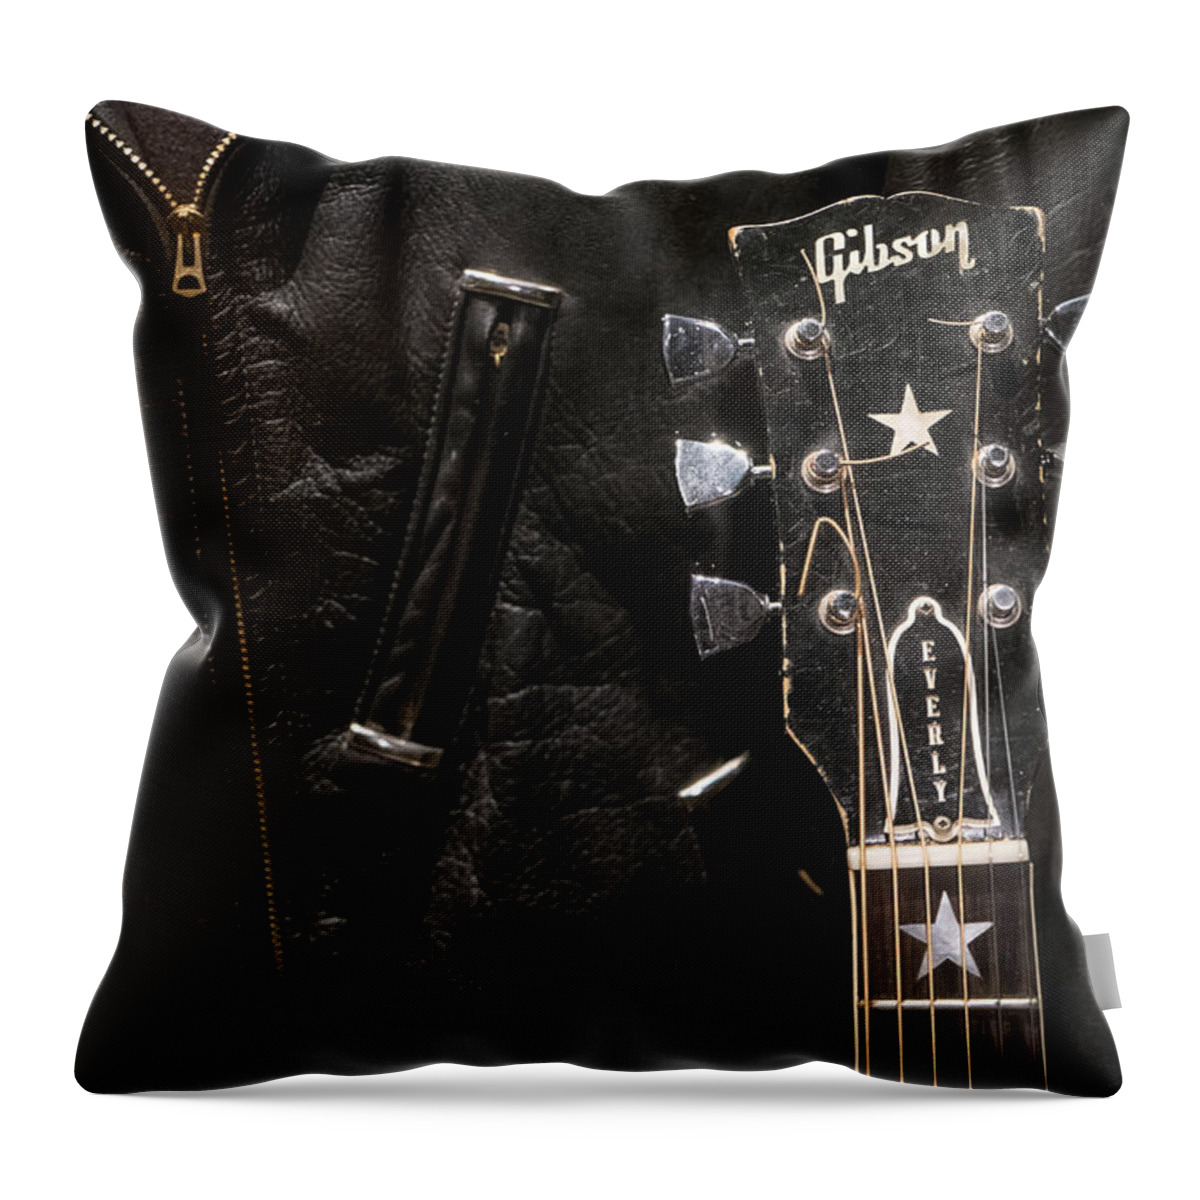 Nashville Throw Pillow featuring the photograph Everly Brothers by Glenn DiPaola